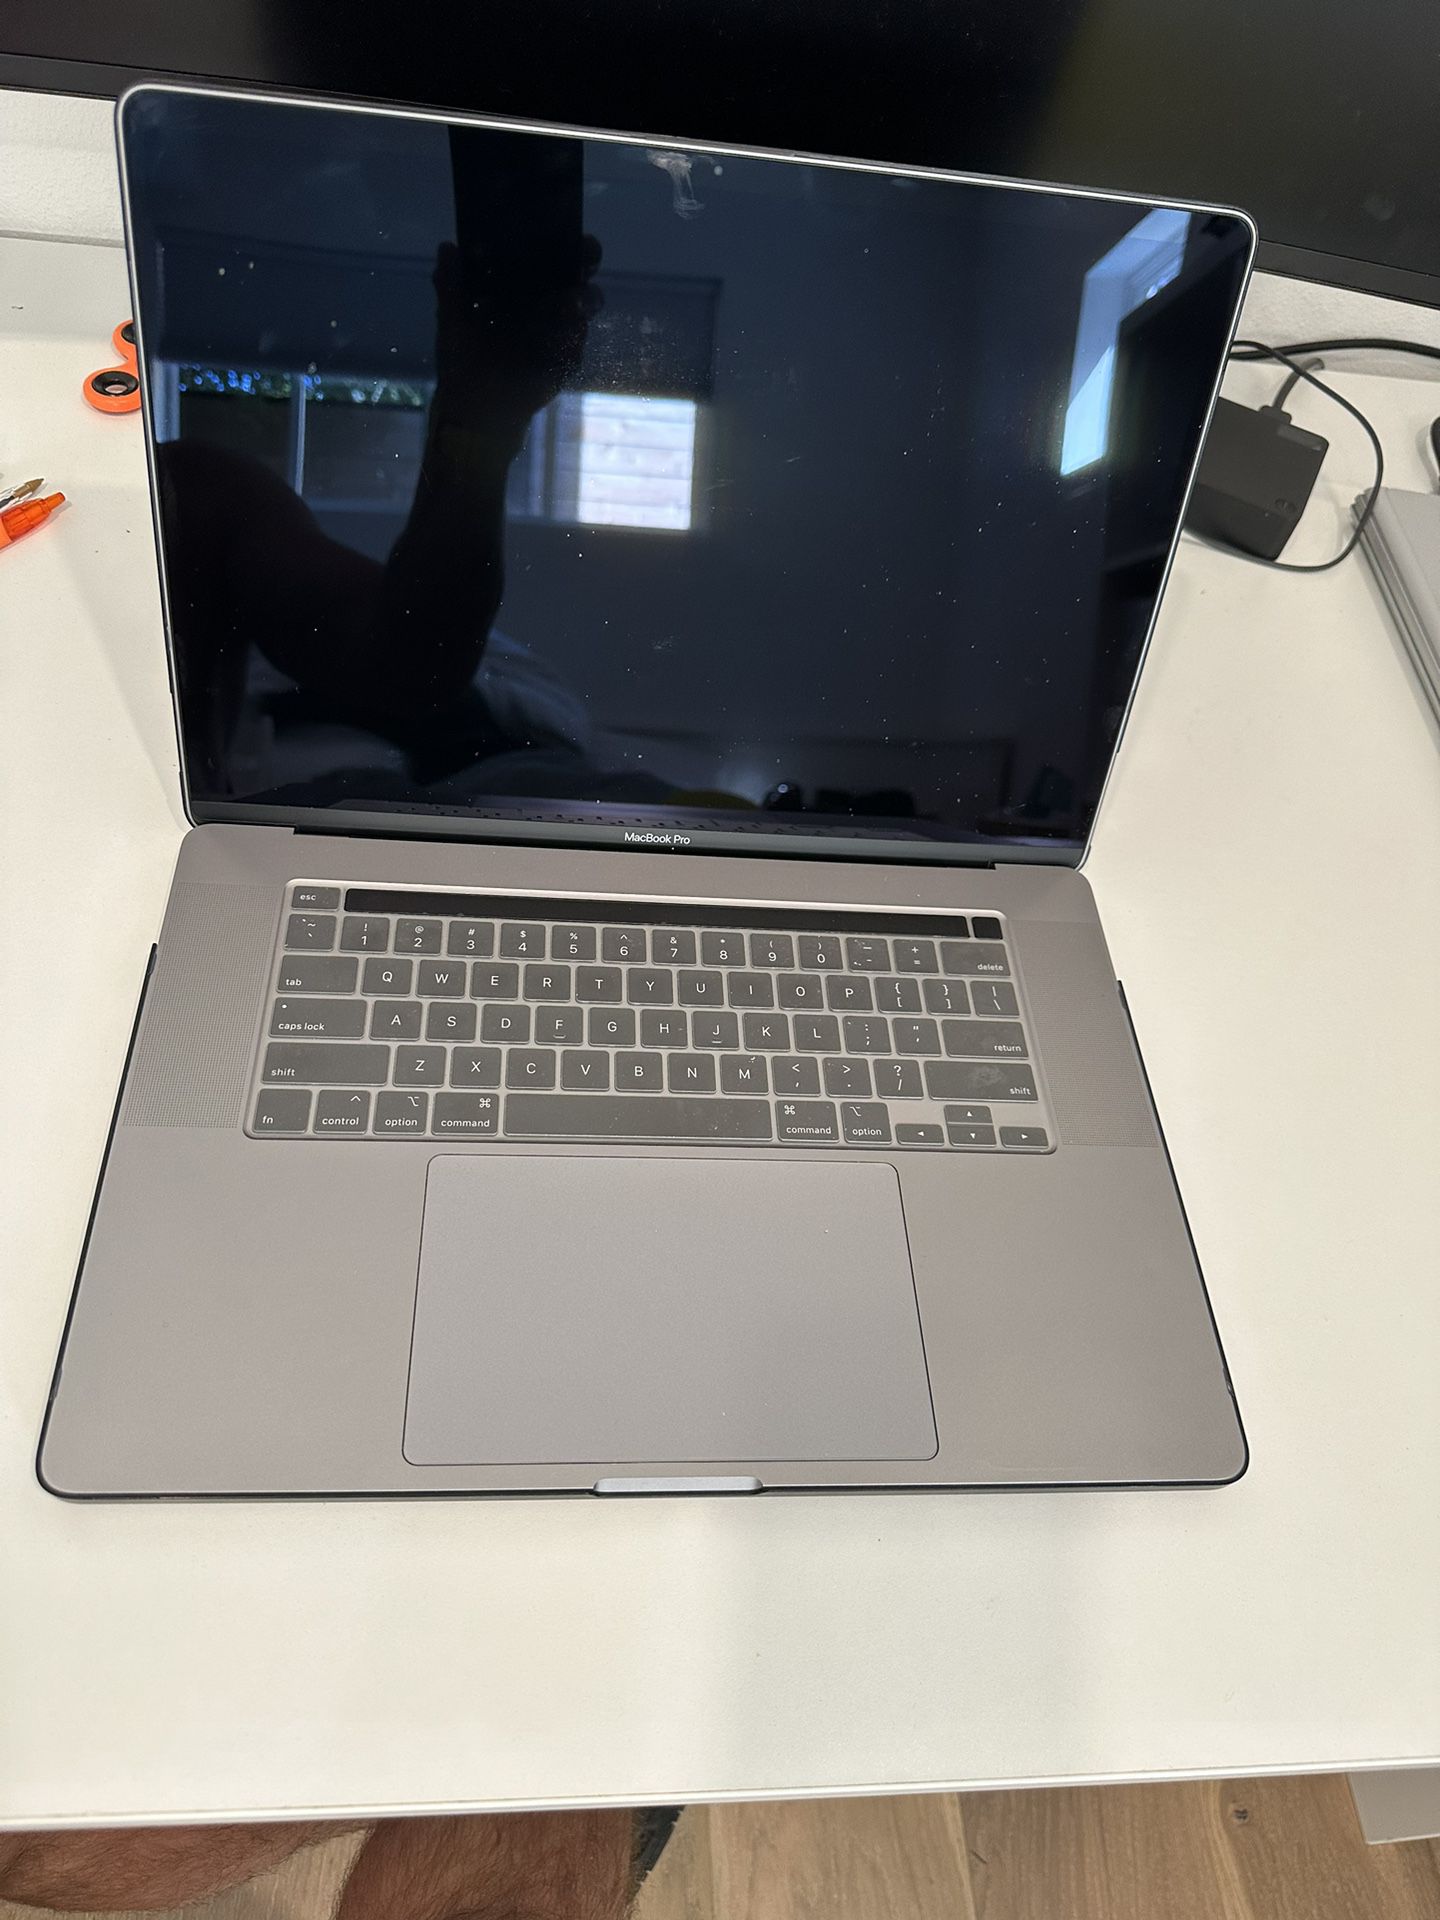 2019 MacBook Pro 16 Inch Processor 2.4 GHz 8-Core Intel Core Graphics Intel UHD Graphics  MB inish Memory 32 GB 2667 MHz DDR4 Serial number C02F71K